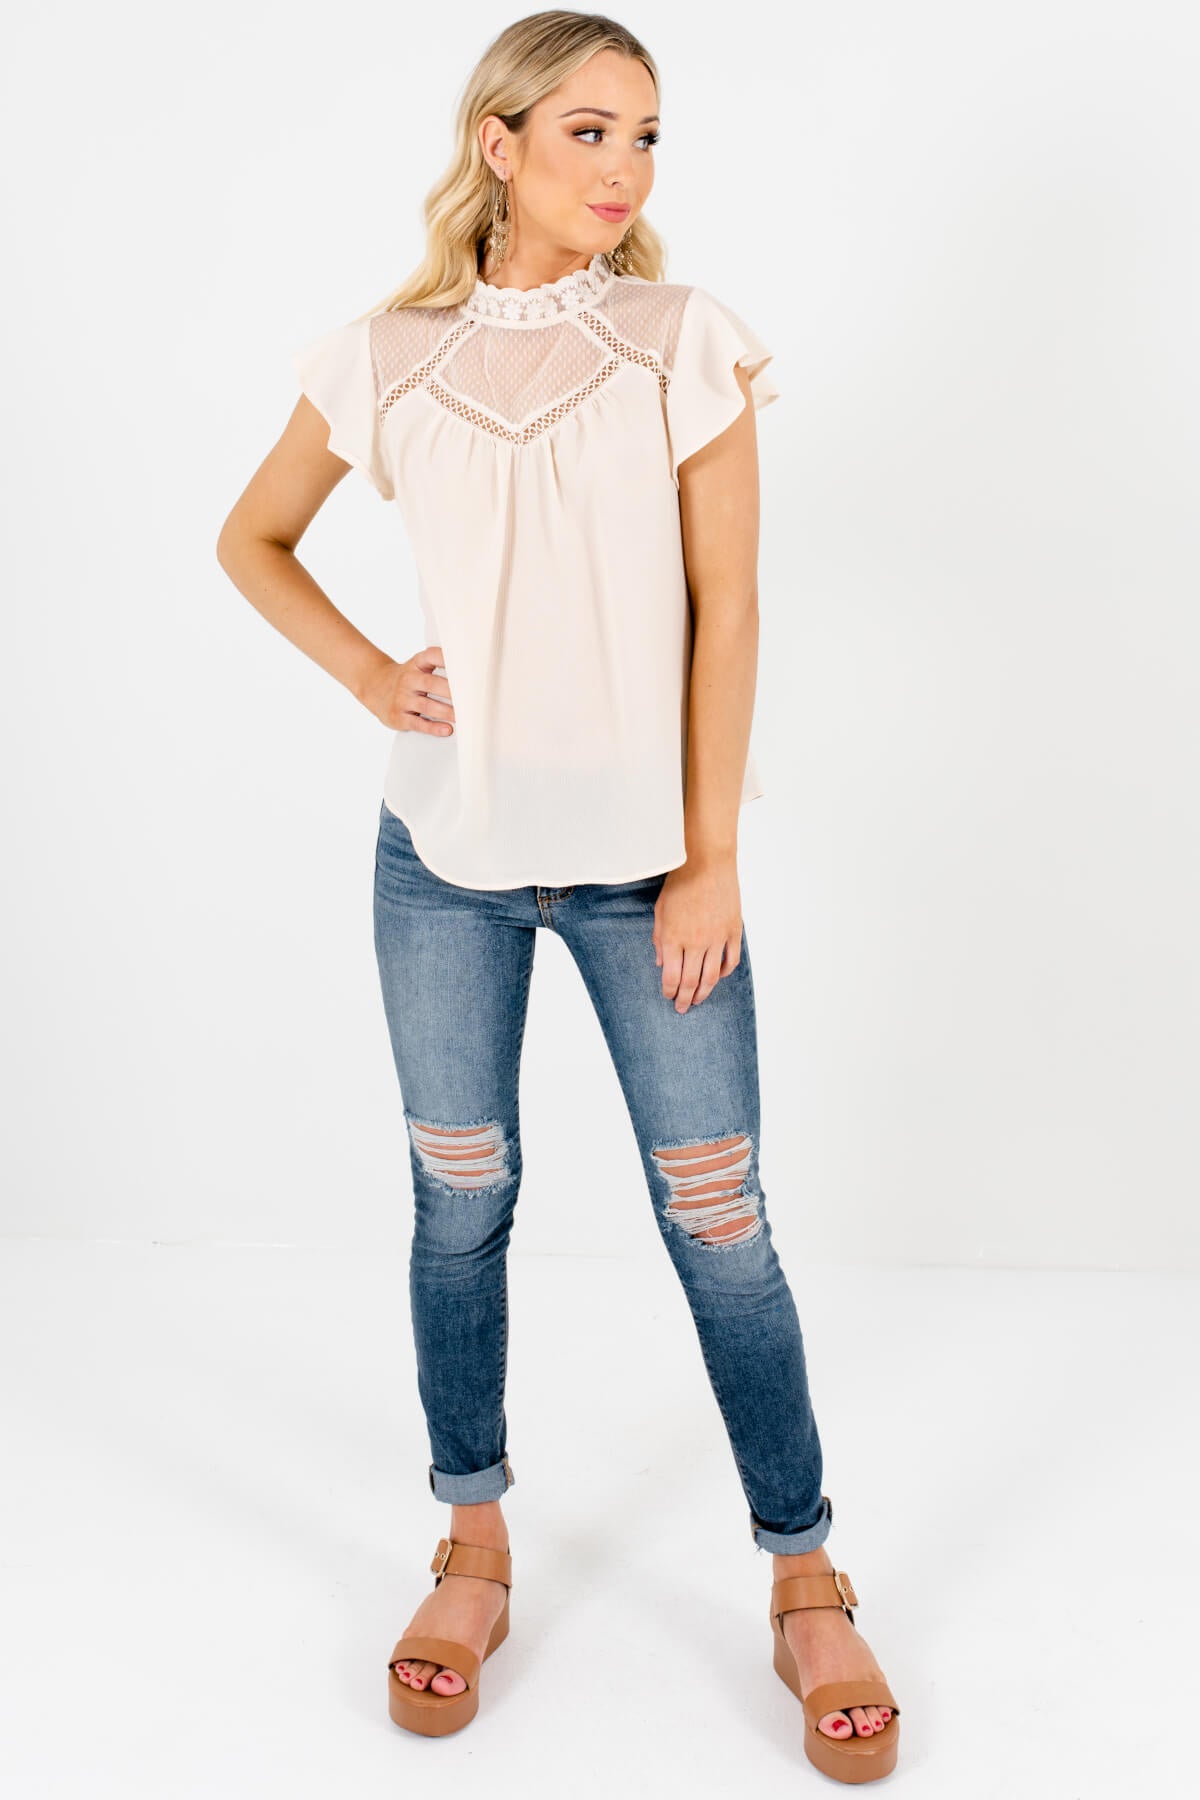 Women's Cream Spring and Summertime Boutique Clothing